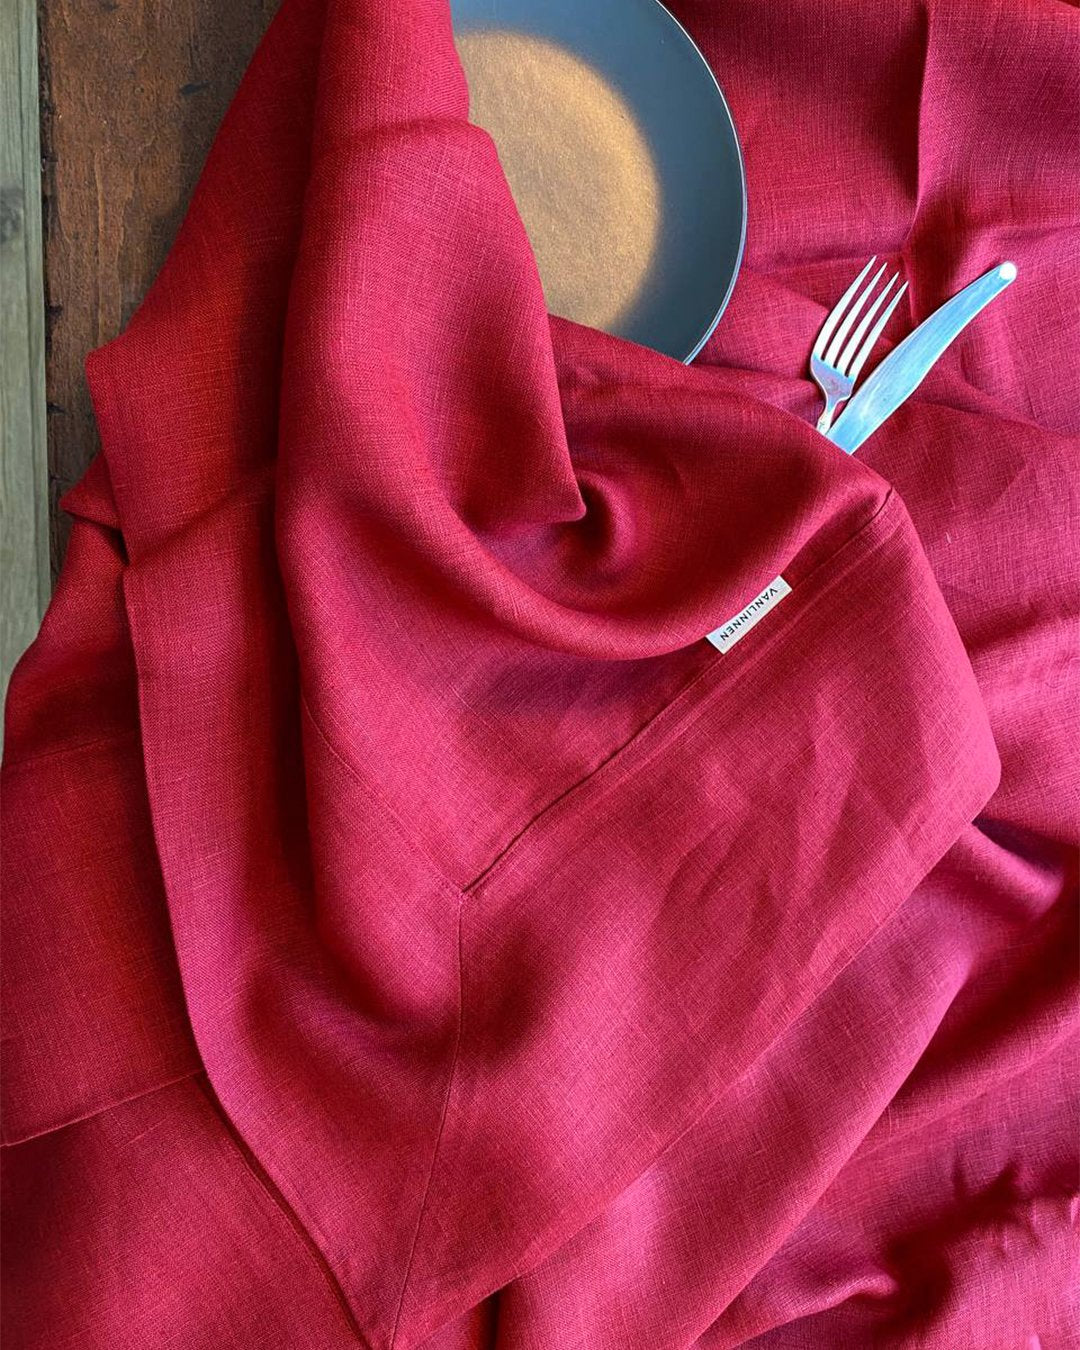 Christmas tablecloth from soft linen in Scarlet red